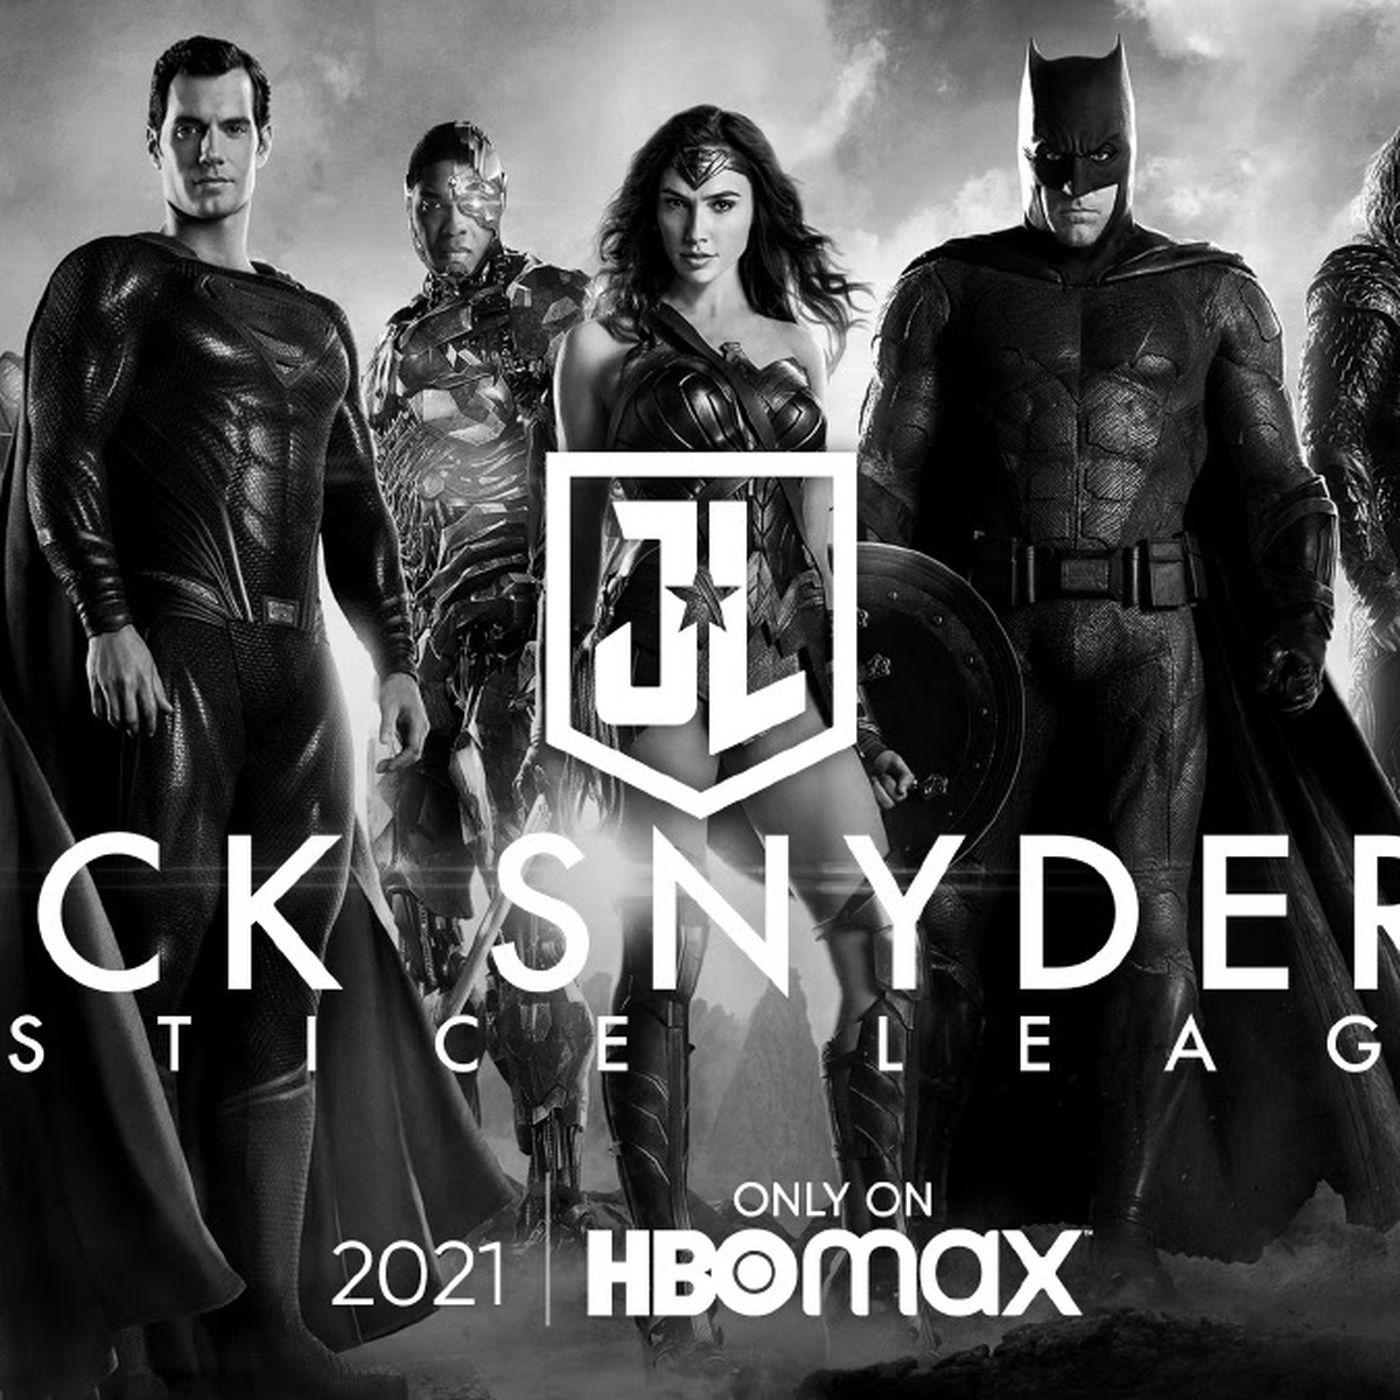 The 'Snyder Cut' of Justice League is coming to HBO Max on March 18th